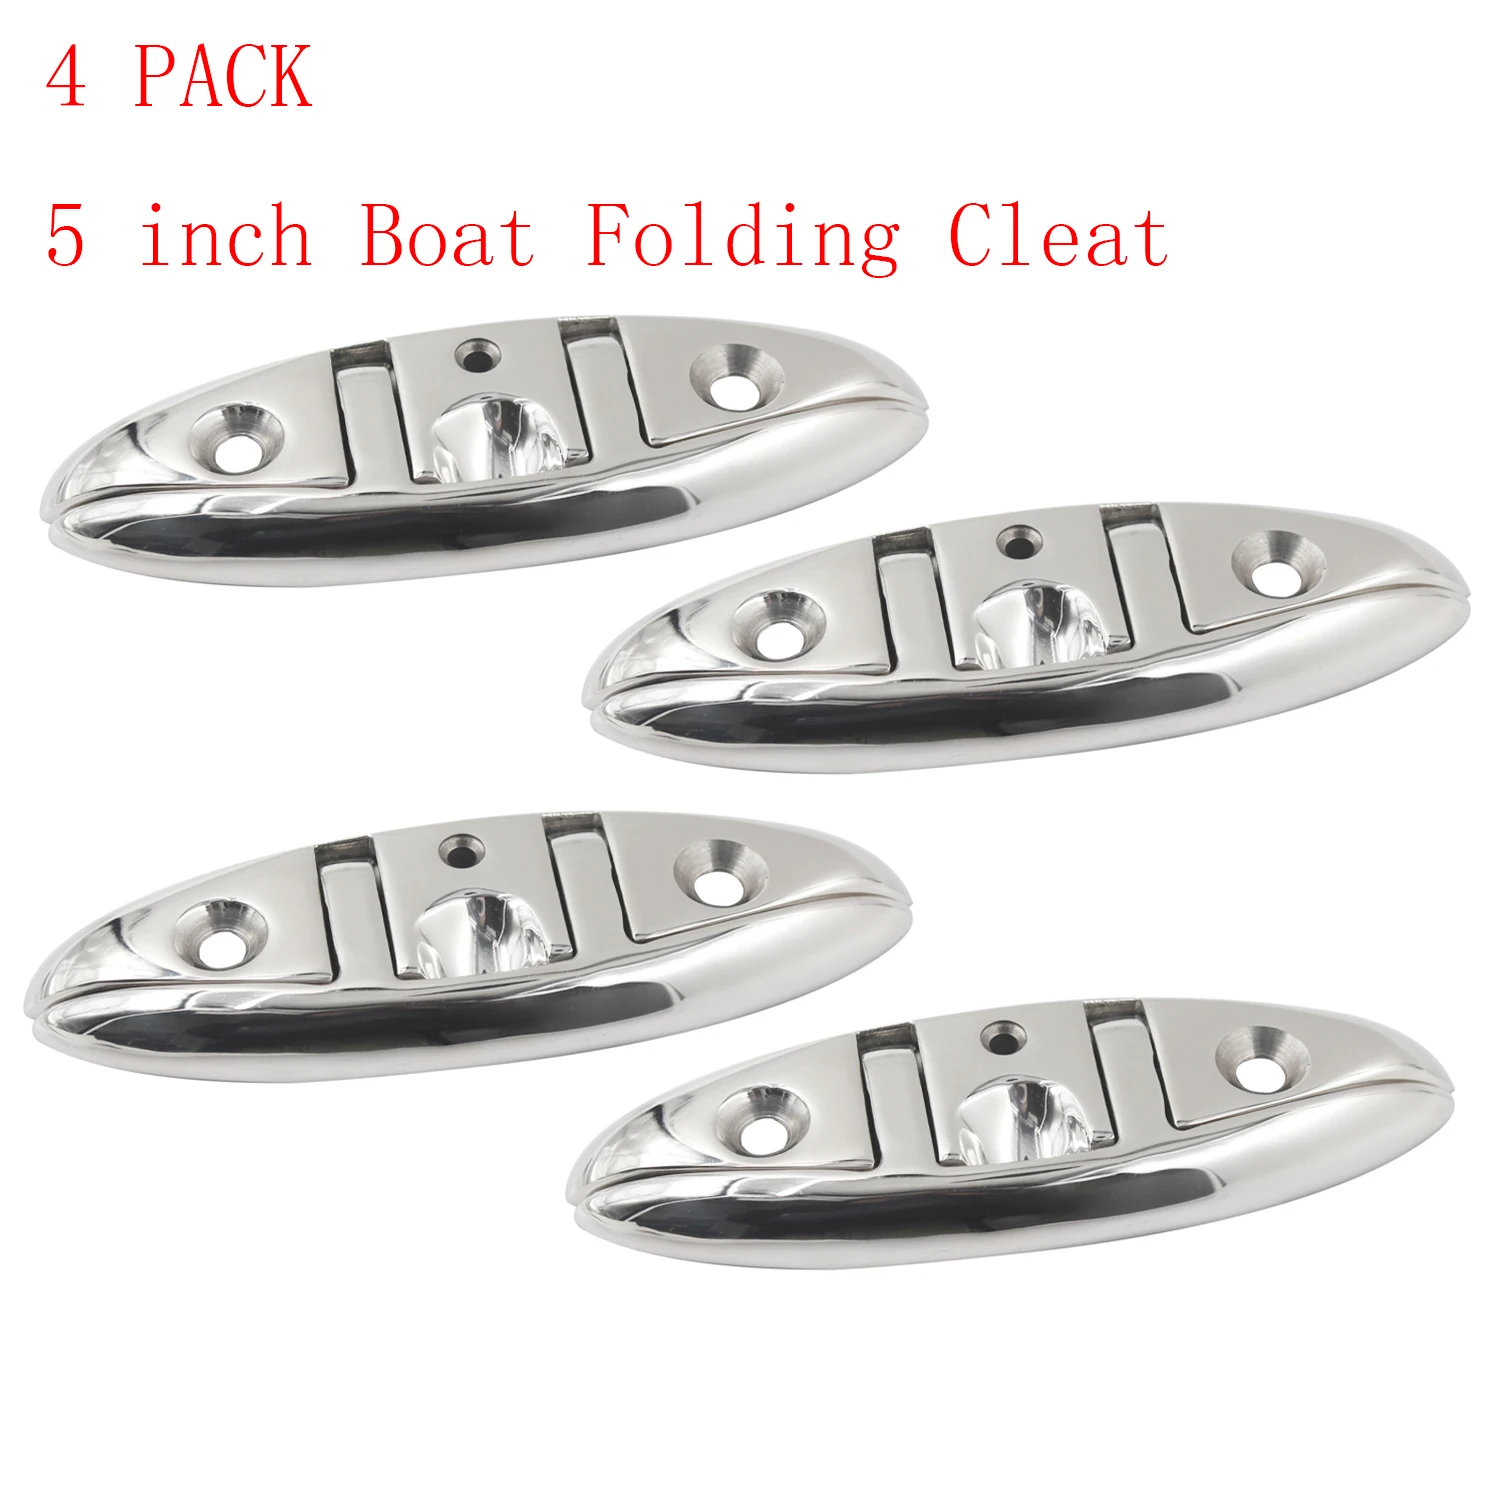 Enlarge 4 Pcs 5 Inch Boat Folding Cleat Deck Flip Up Flush Dock Mount Cleat Marine Stainless Steel 316 Mooring Rope Cleat